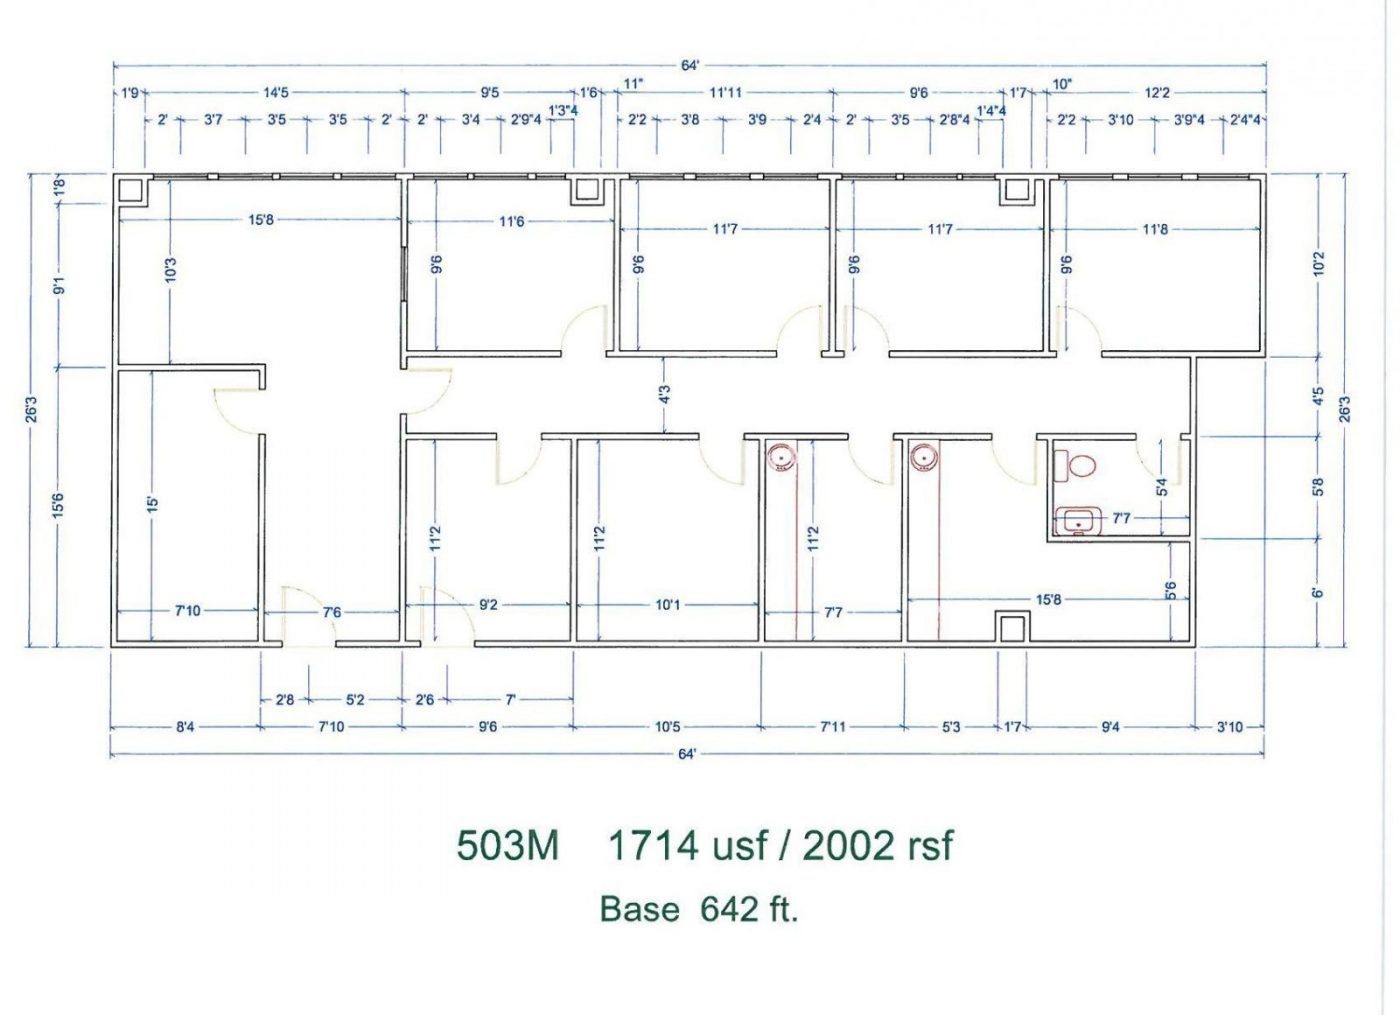 Floor Plan for unit 503M at 20905 Greenfield Rd - 5th Floor Southfield, MI 48075